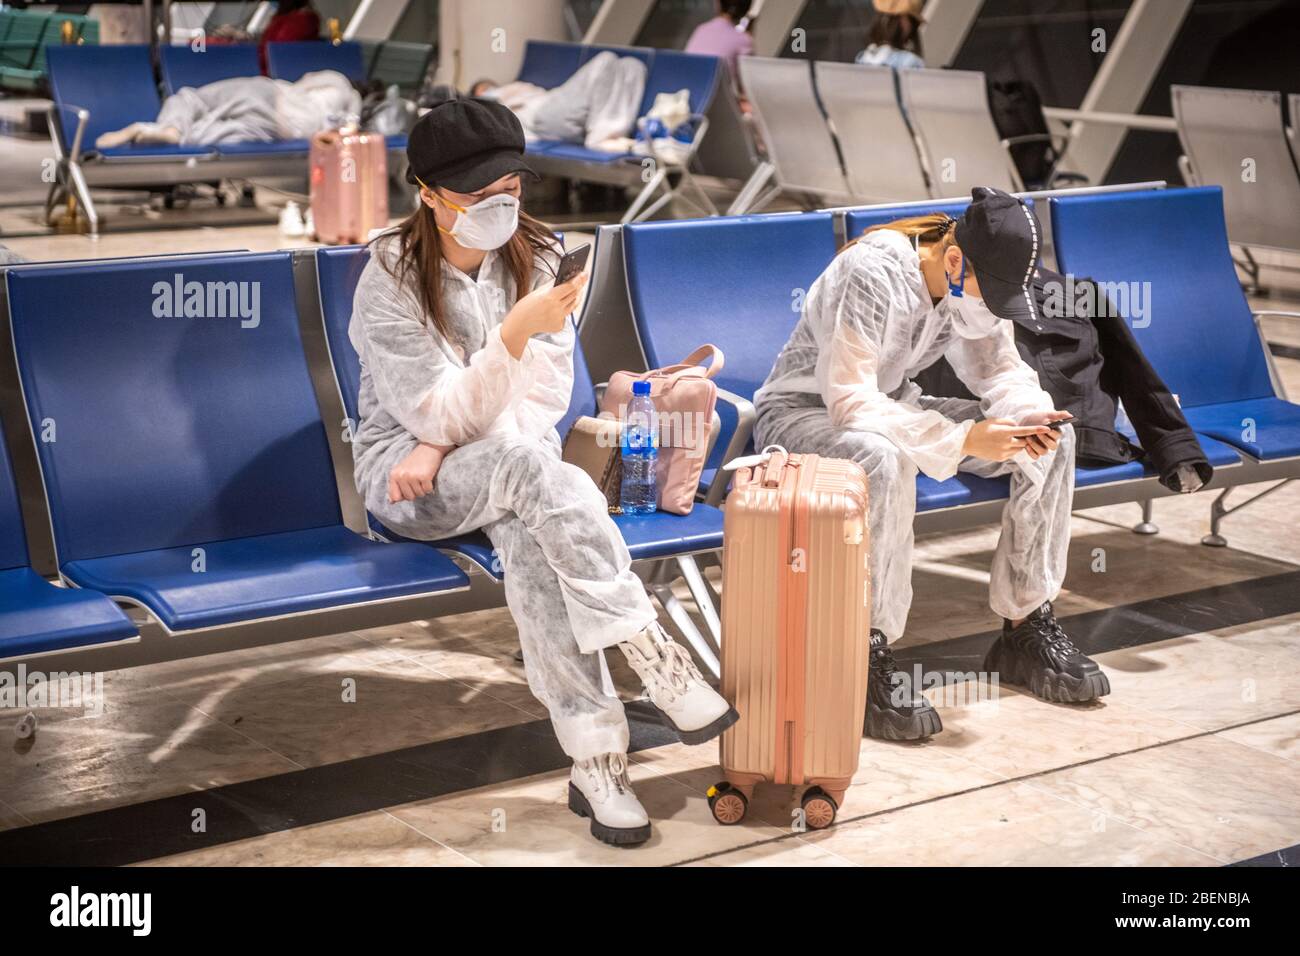 Traveller waiting for flights in protective masks and clothing during Covid-19 outbreak at Bole International Airport in Addis Ababa Ethiopia Stock Photo